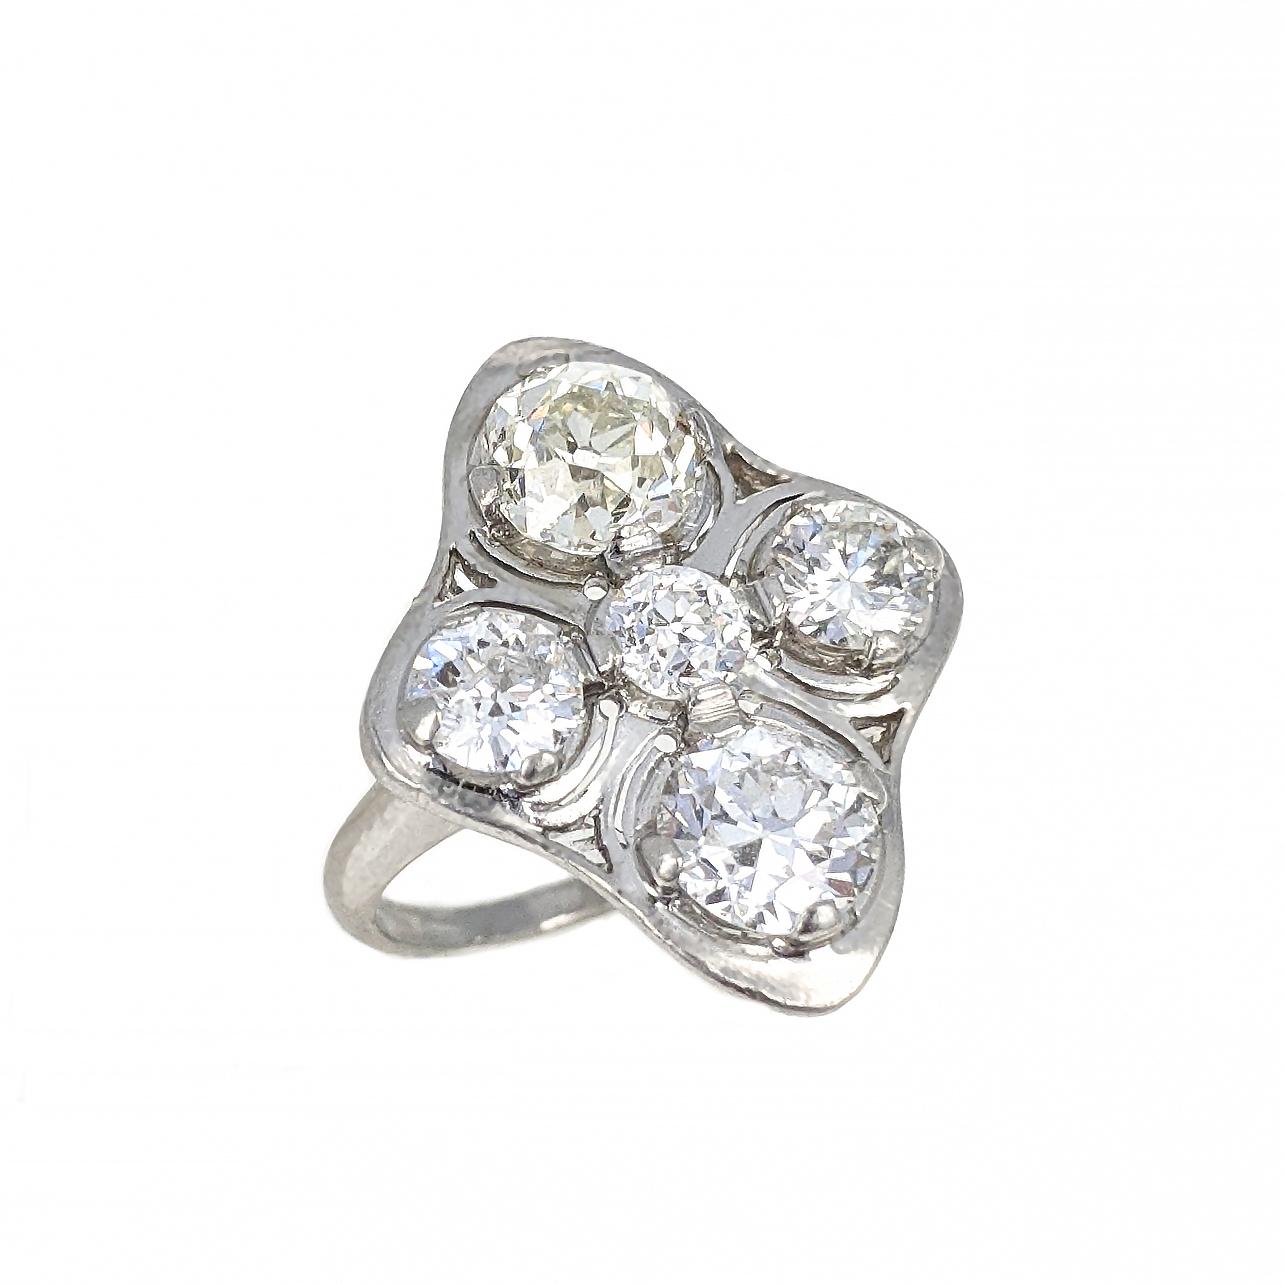 This ring features four Old European cut diamonds weighing approximately 2.2 carats and one round brilliant cut diamond weighing approximately .3 carats. It is mounted in platinum with openwork details. The top of the ring measures 2.5 x 2 cm. Size